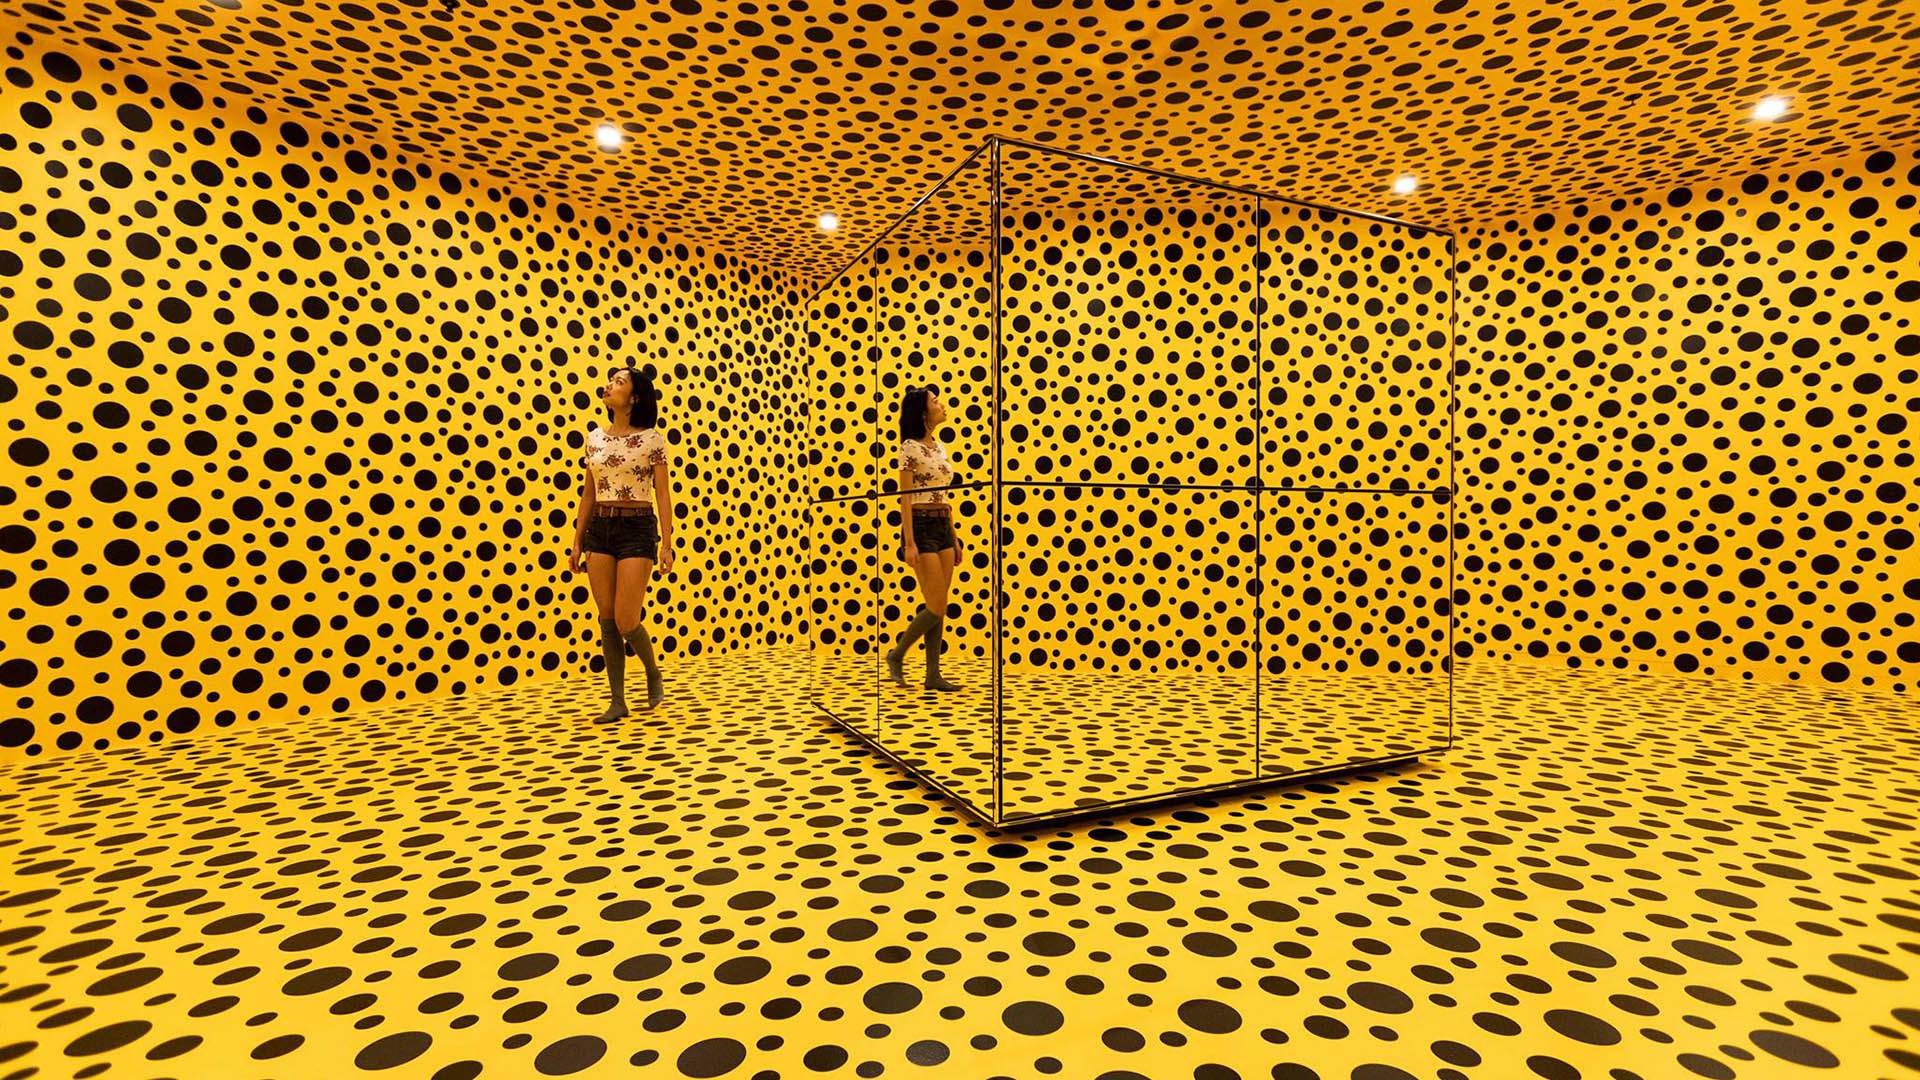 One of Yayoi Kusama's Infinity Rooms Has Taken Up Permanent Residence in Australia